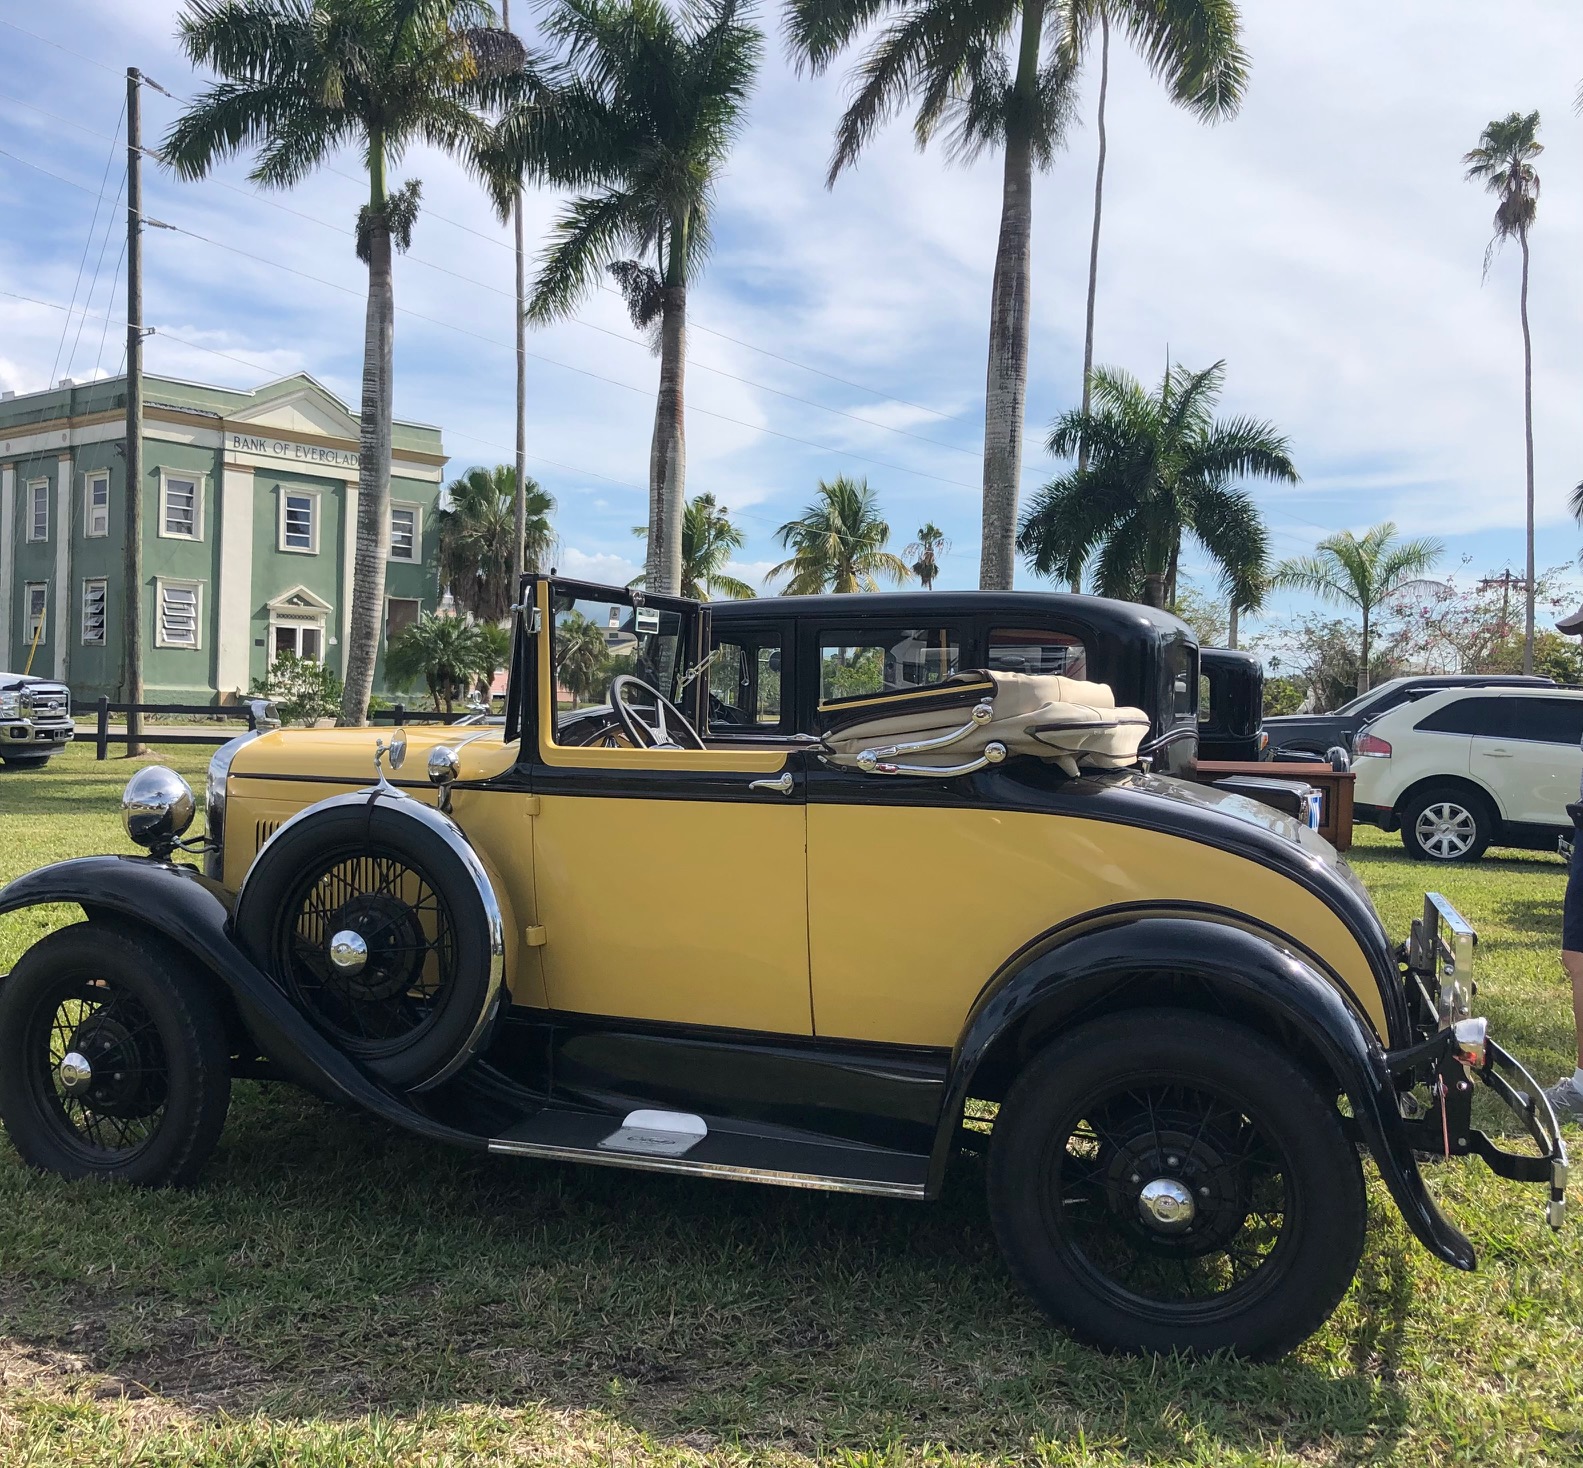 A vintage car parks outside the Bank of Everglades.